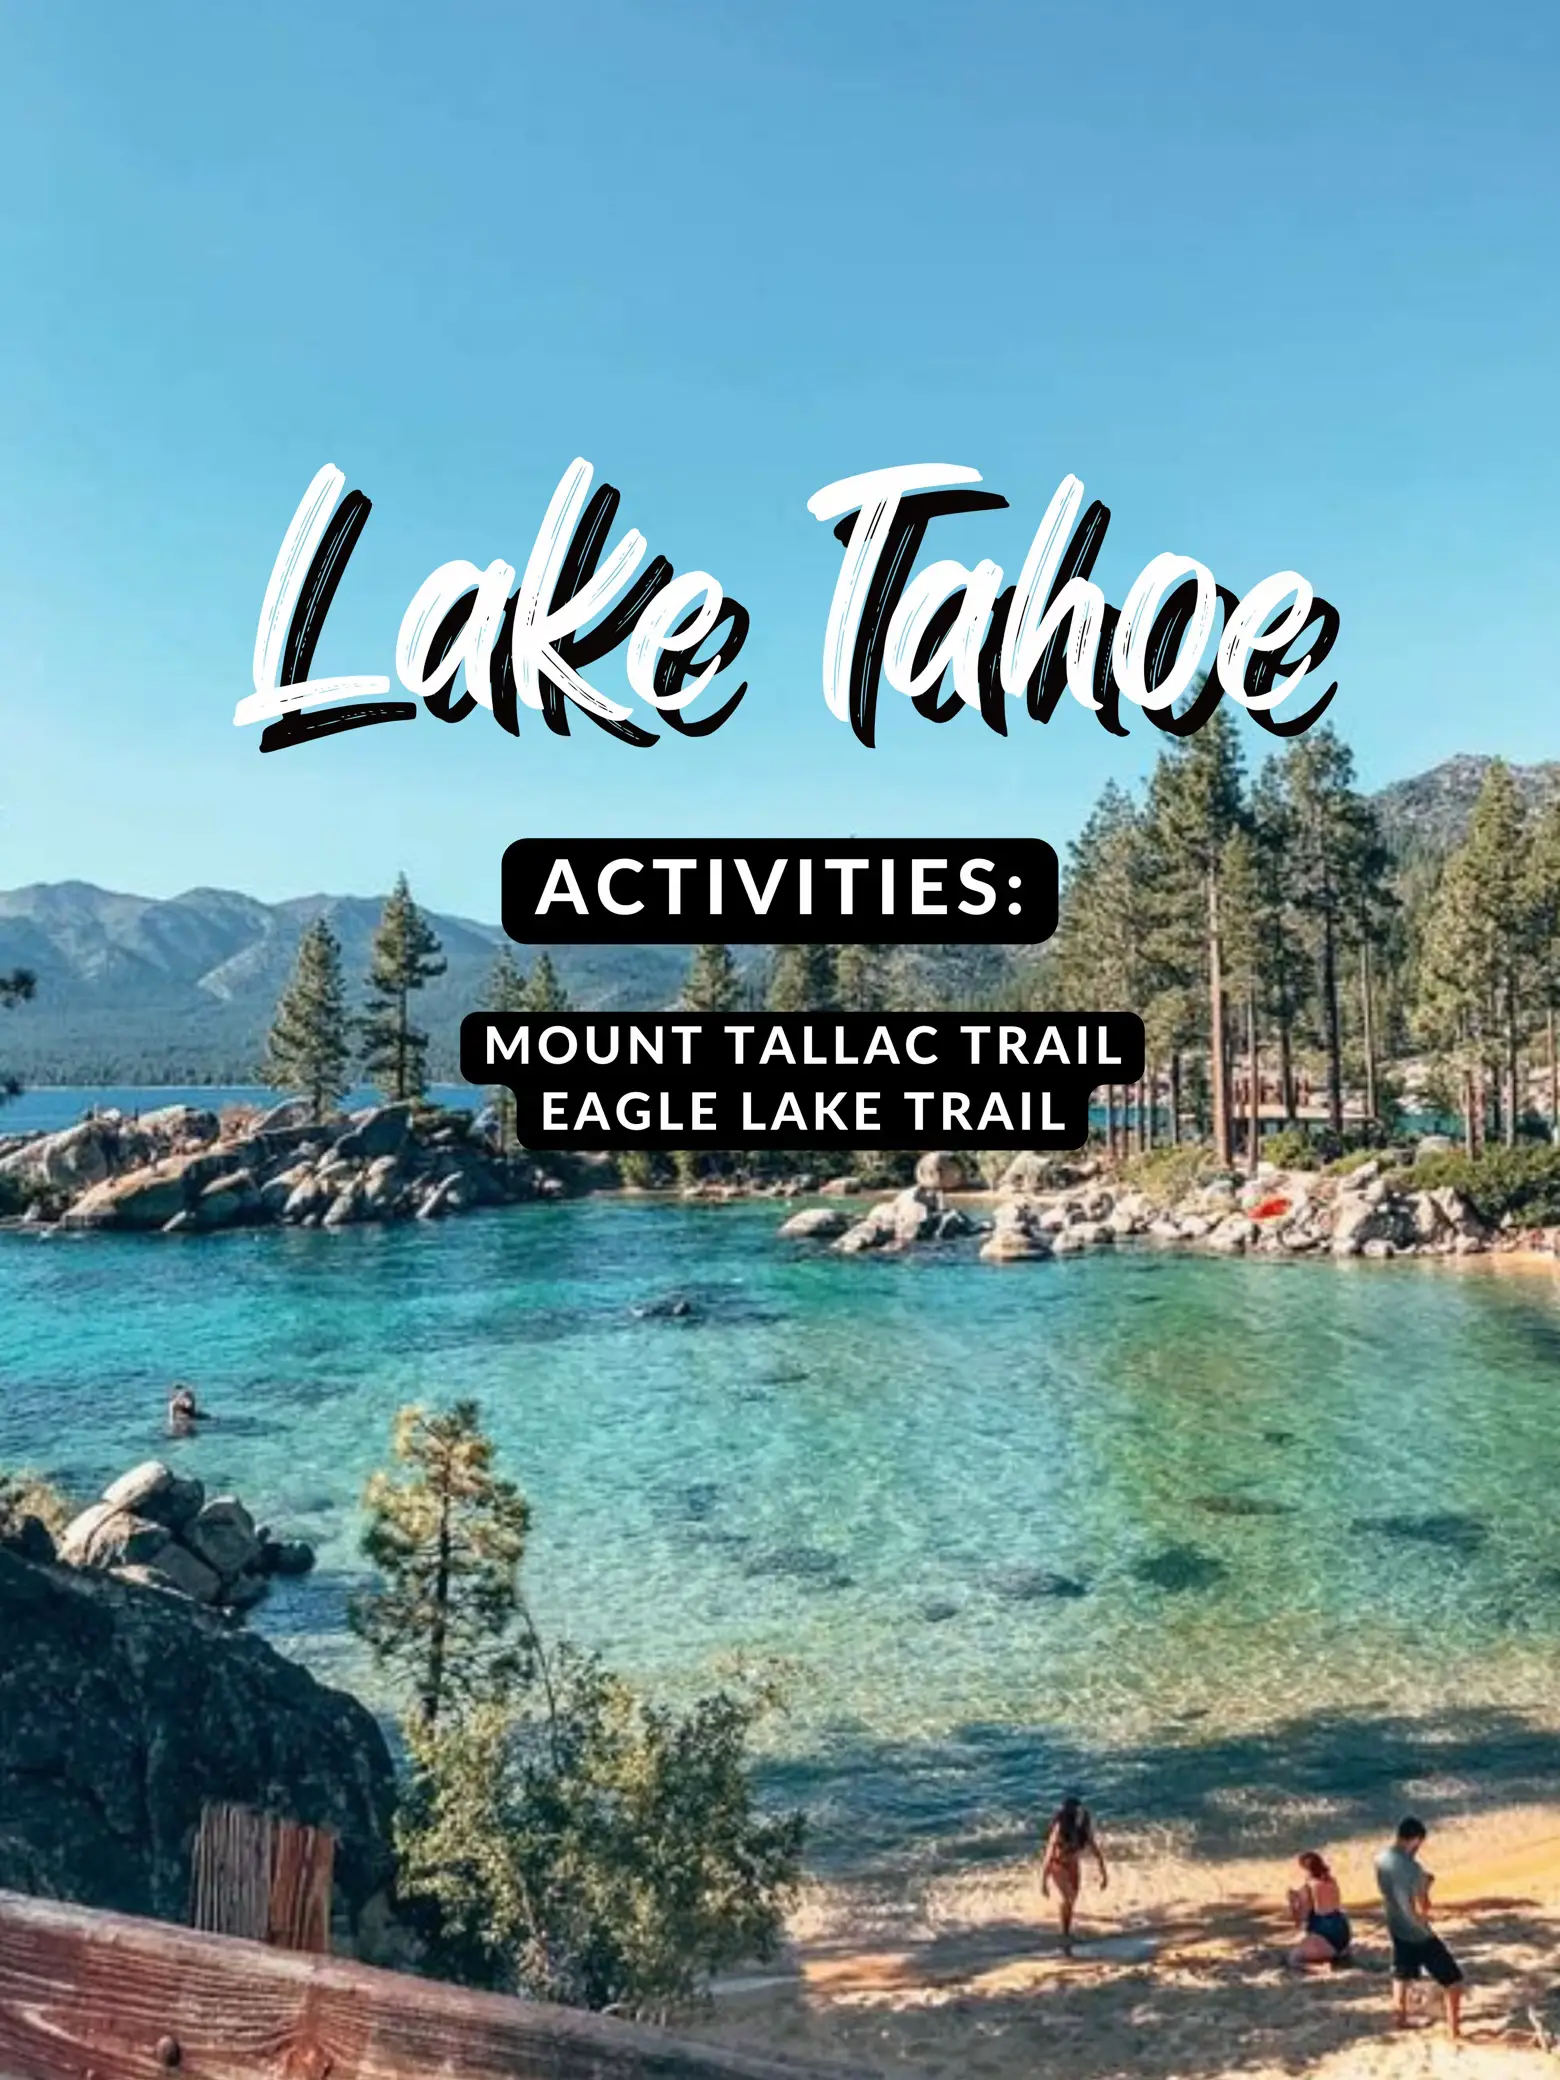  A trail map for Mount Tallac Trail and Eagle Lake Trail.